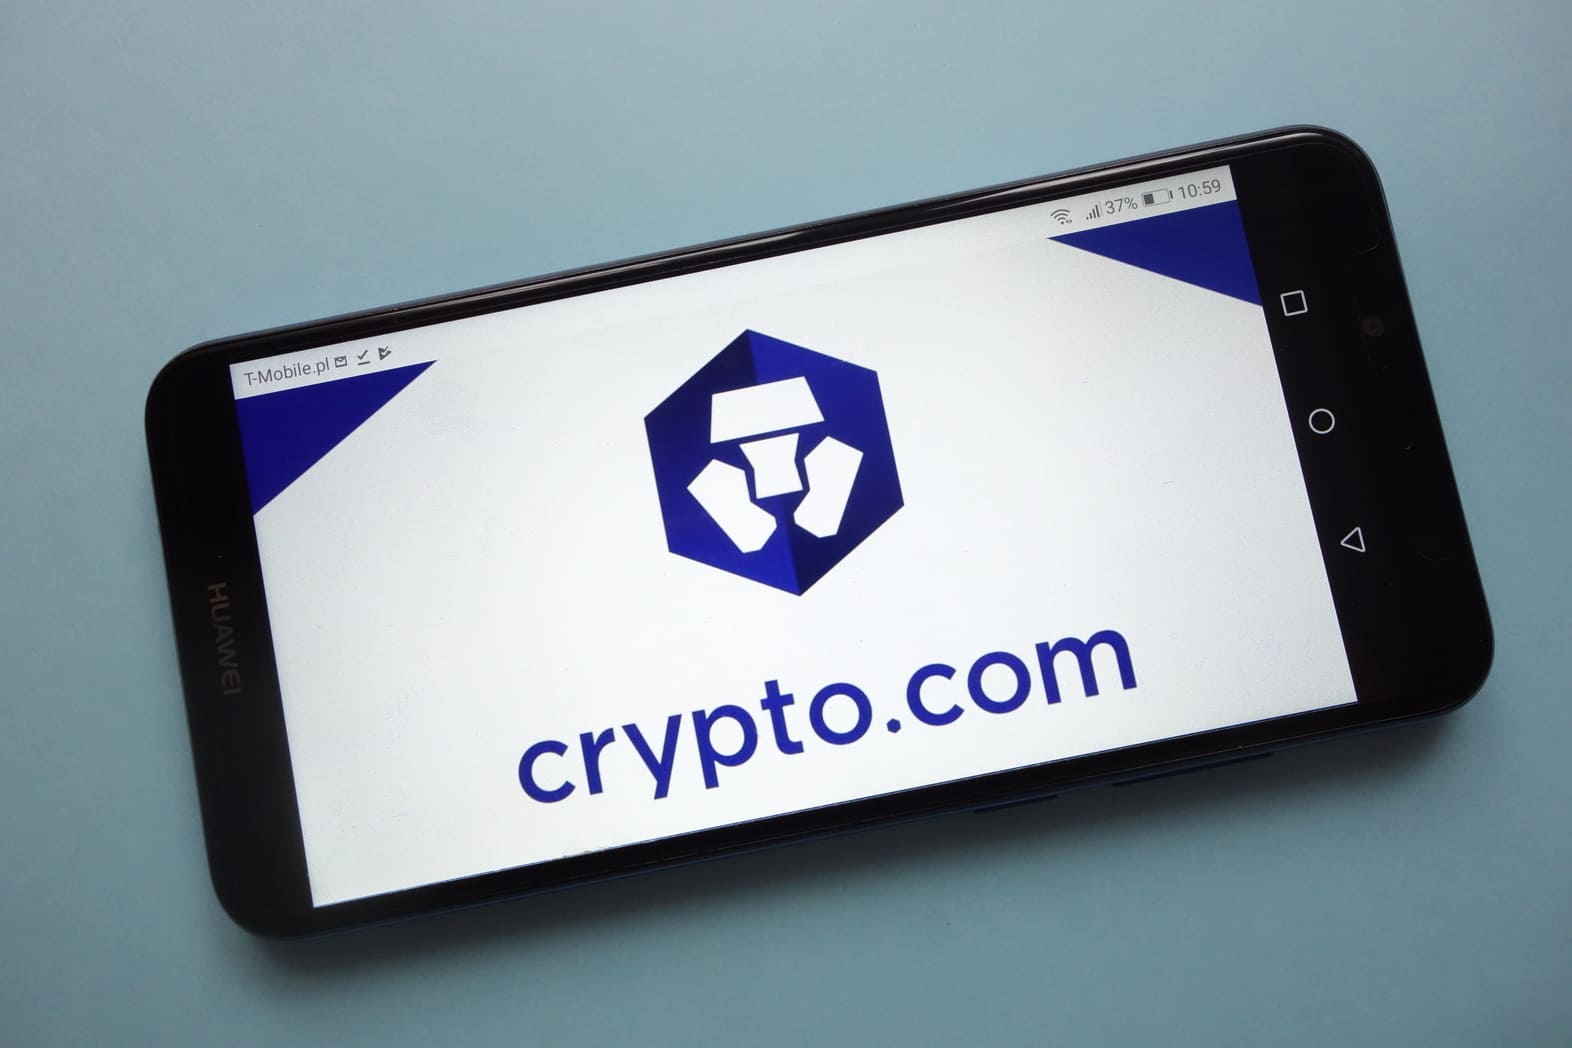 Crypto.com transfered $10.5m AUD to Australian woman by mistake